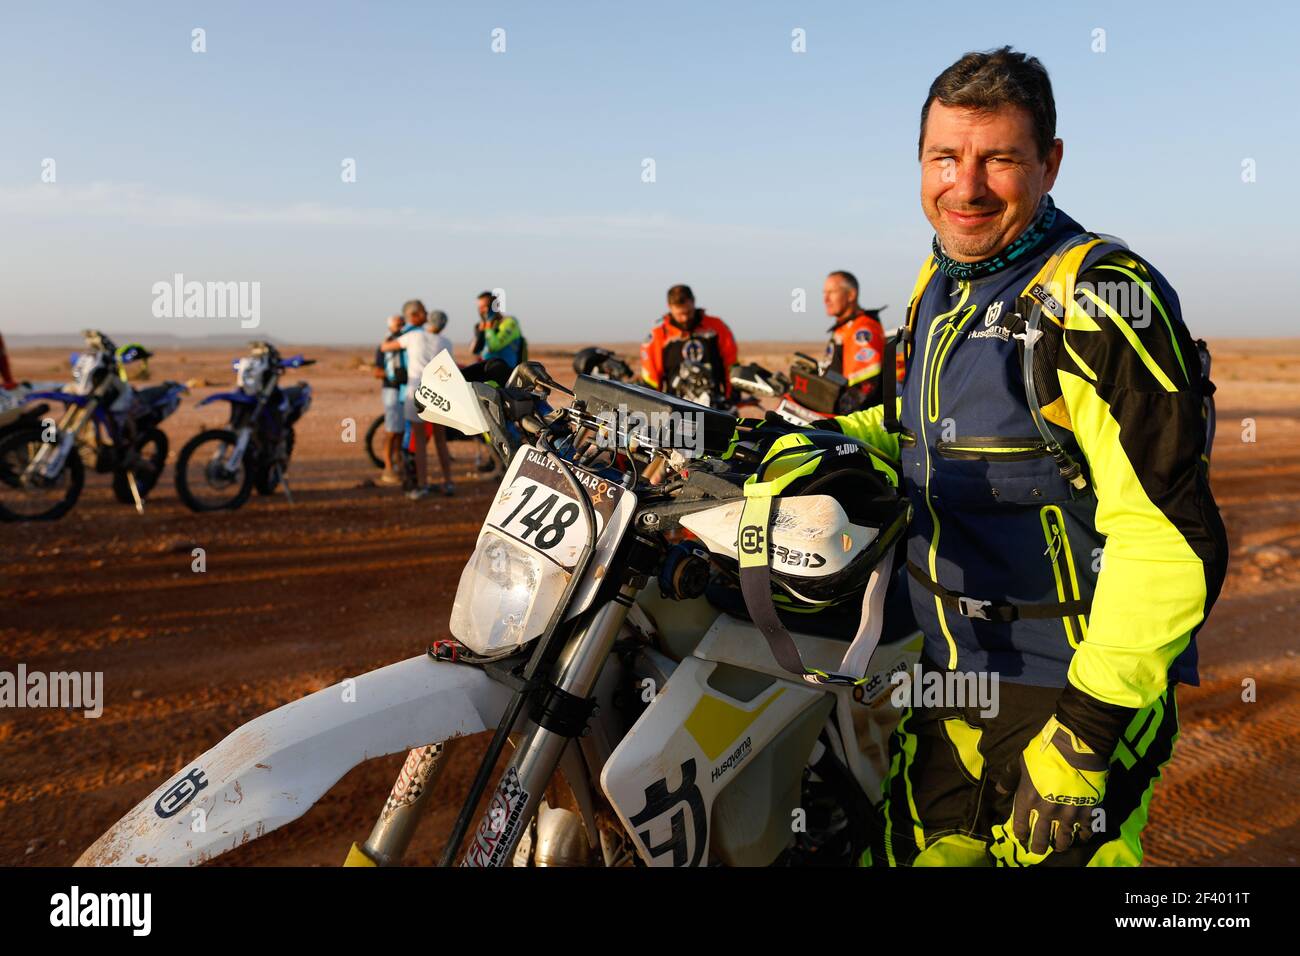 148 HAMARD Stephane (FRA), Reunion Union Rallye Raid, Husqvarna 250 TEI, Enduro Cup, action during Rally of Morocco 2018, Stage 5, Erfoud to Fes, october 9 - Photo Frederic Le Floc'h / DPPI Stock Photo